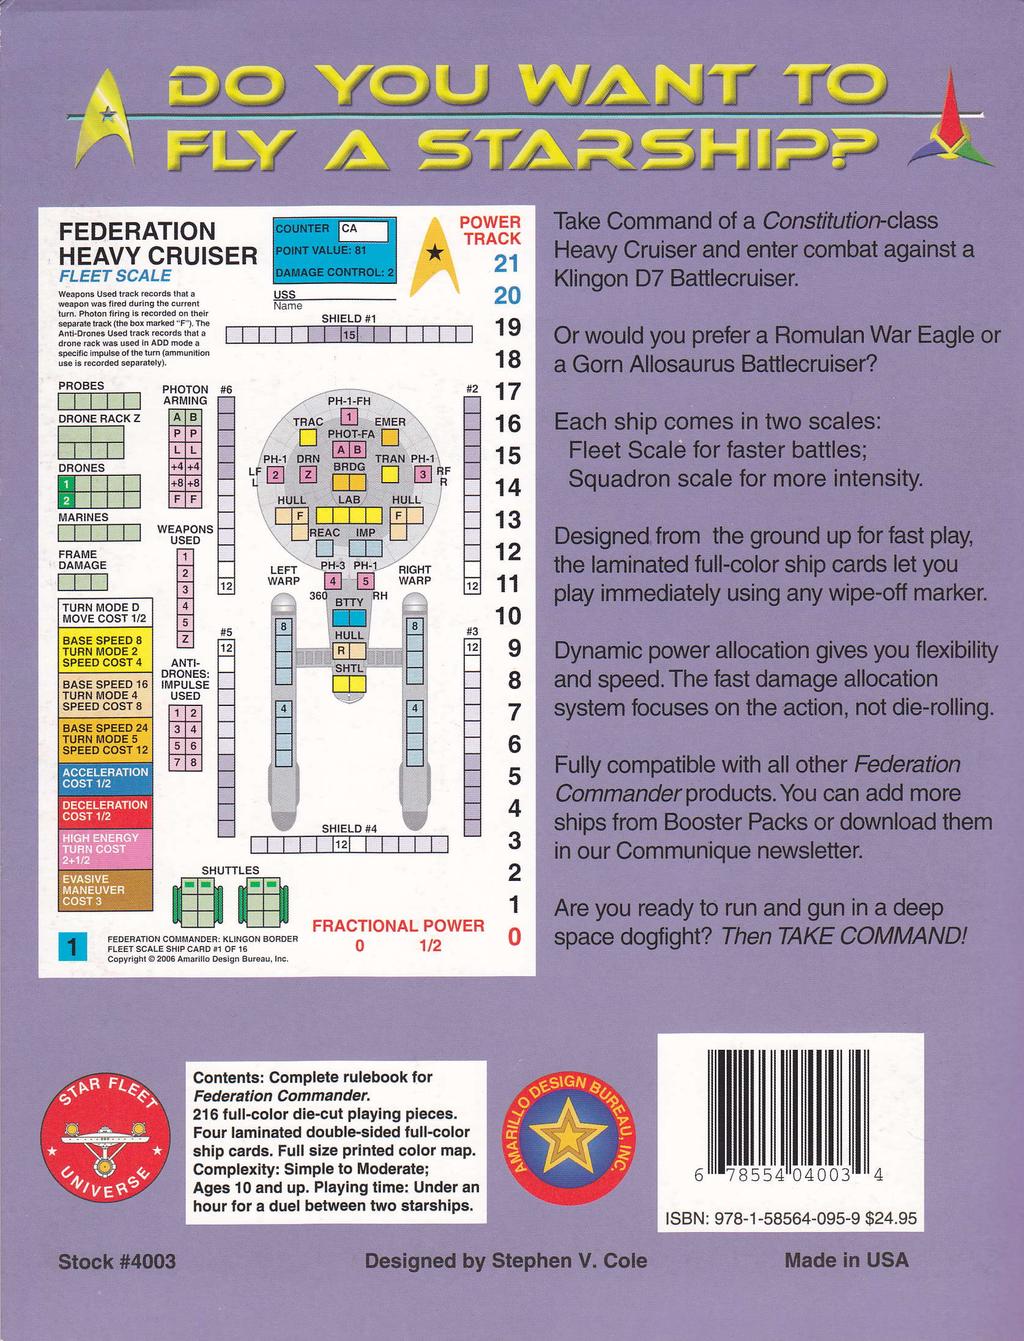 Contents: Complet rulebook for Fedentlon CommandeL 216 full-color die-cut playlng plec s. Four laminated doublesided tull-color ship cards. Full size printgd color map.